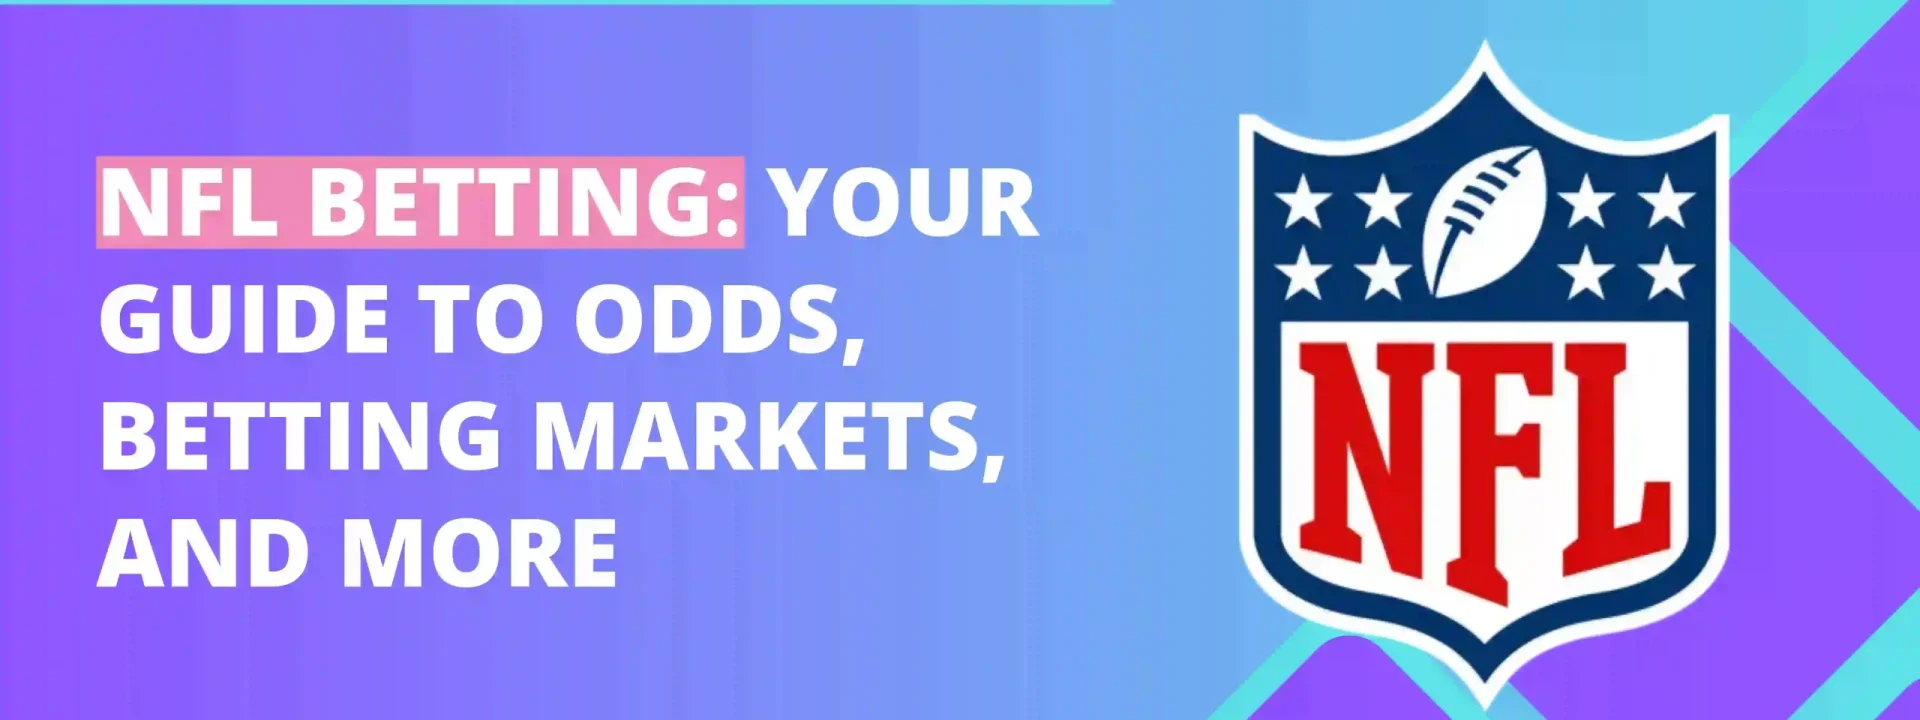 NFL Betting: Your Guide to Odds, Betting Markets, and More